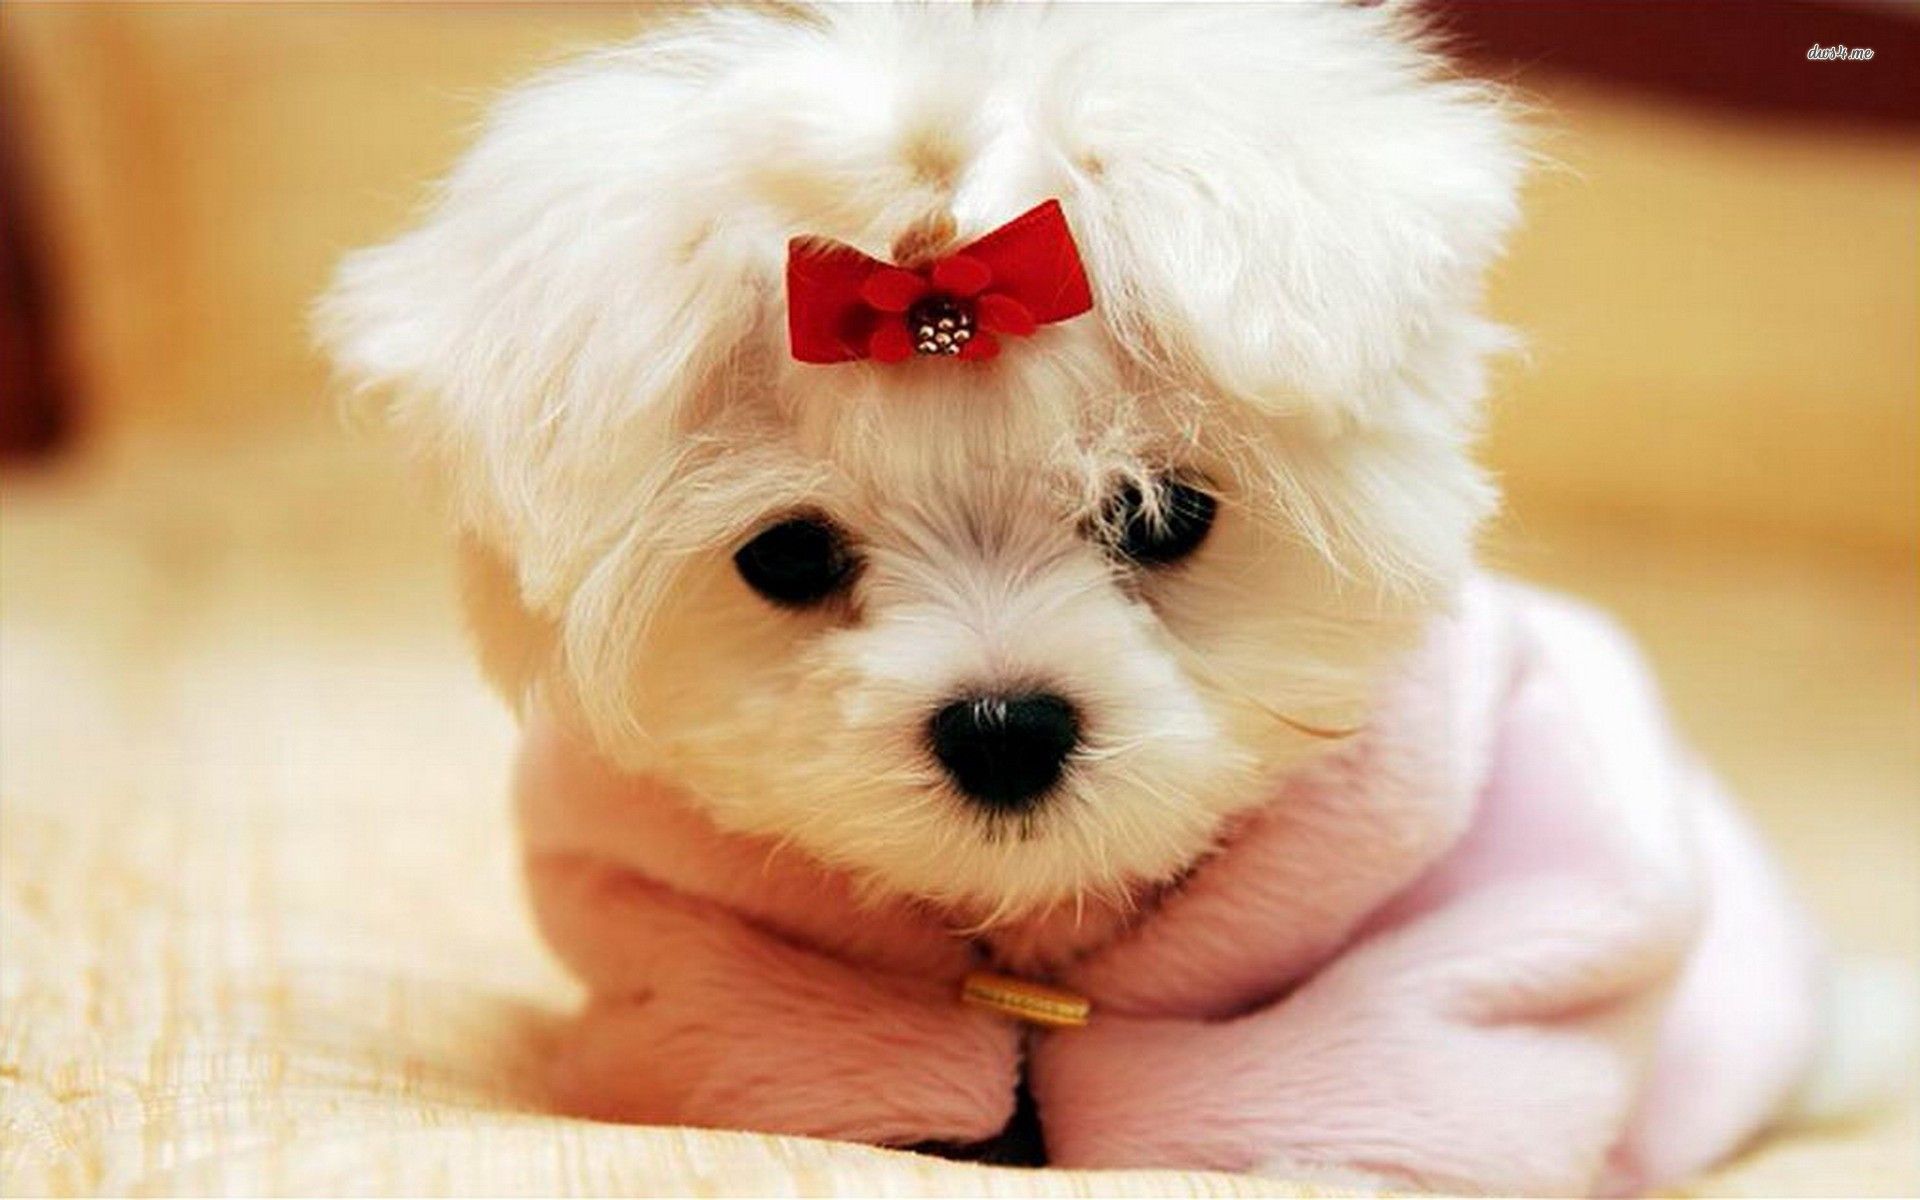 Wallpapers For Gt Cute Puppy Wallpaper Hd 2560x1600PX Cute Puppy